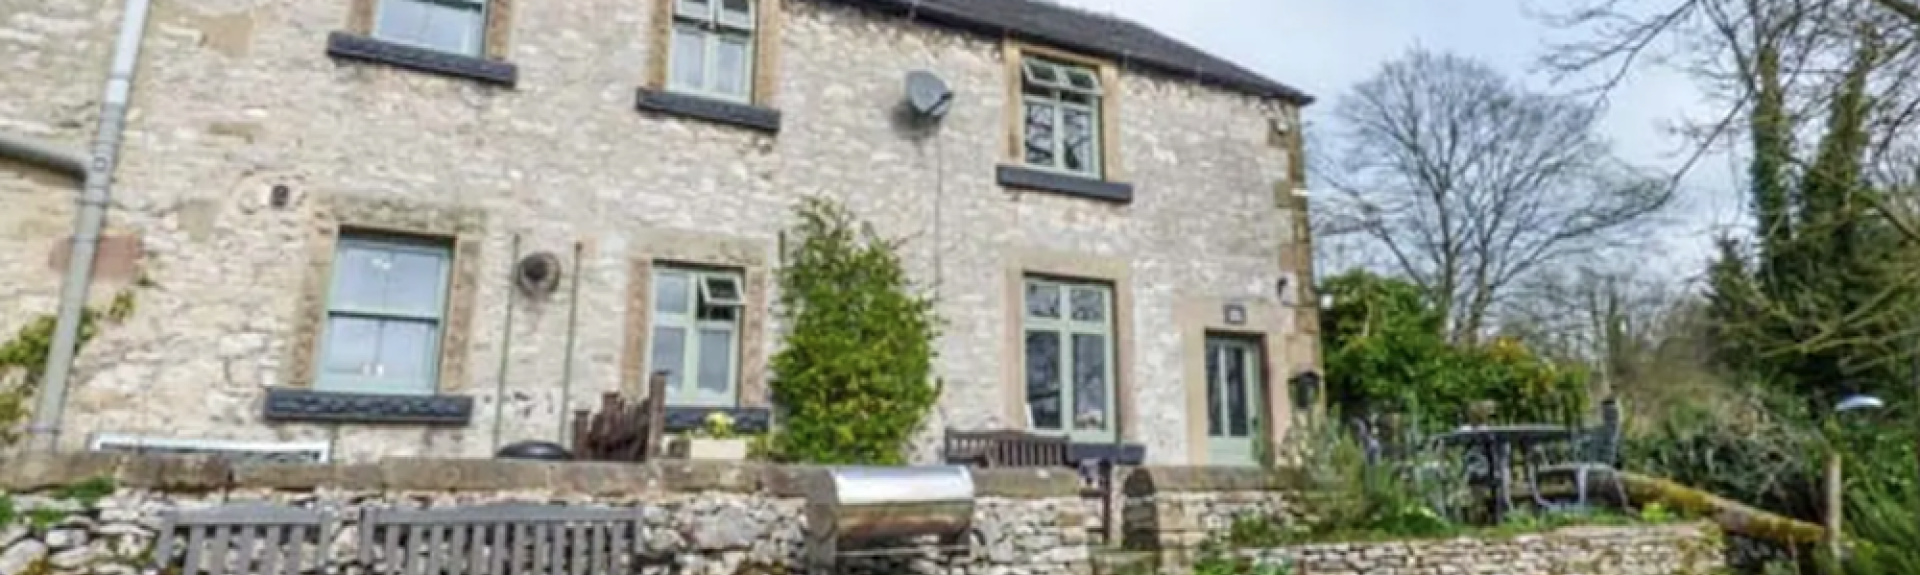 Exterior of a 2-storey stone-built holiday cottage in Derbyshire overlooking a large lawn.